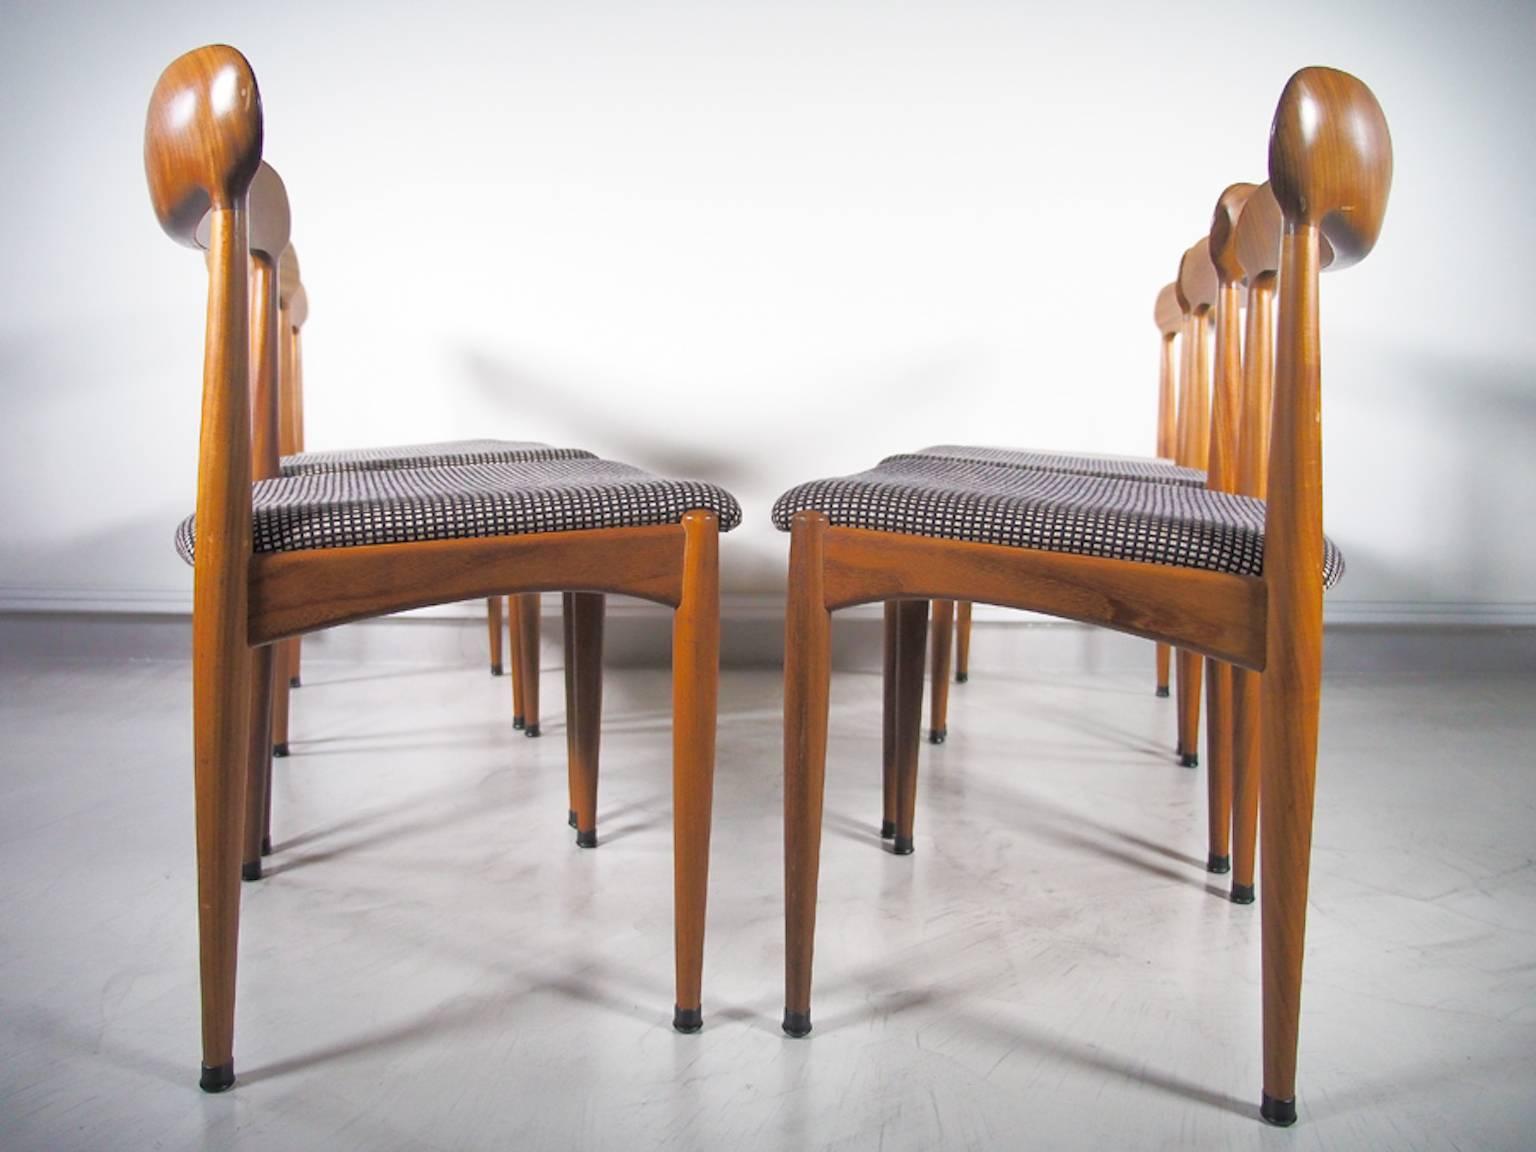 Set of six teak chairs with chequered wool upholstery from the 1960s by Danish furniture designer Johannes Andersen. The seats have a beautiful organically shaped backrest. Produced by Uldum Mobelfabrik in Denmark.